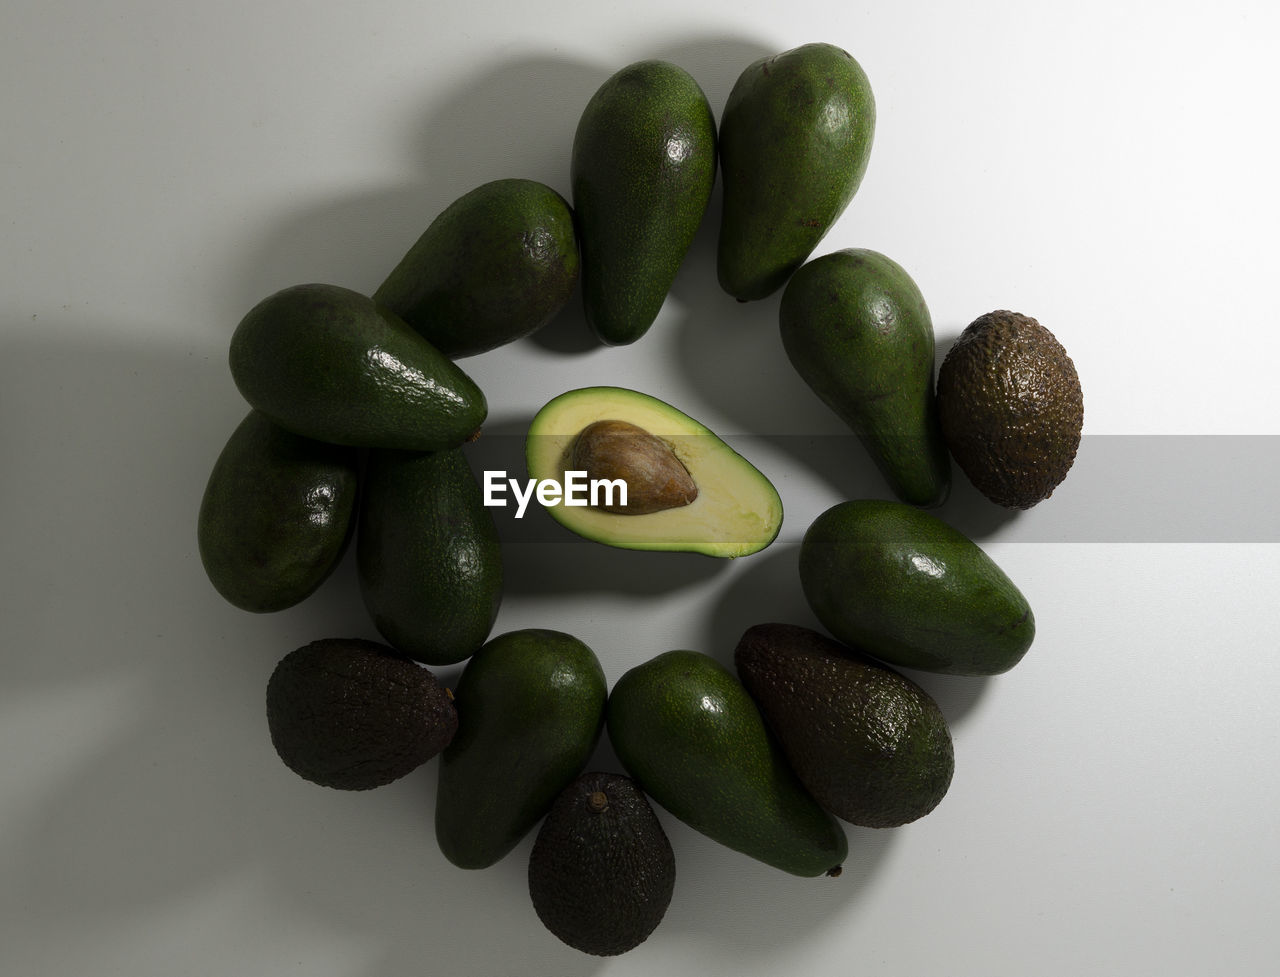 Sliced and whole avocado fruits of different varieties of green and brown on a light background.